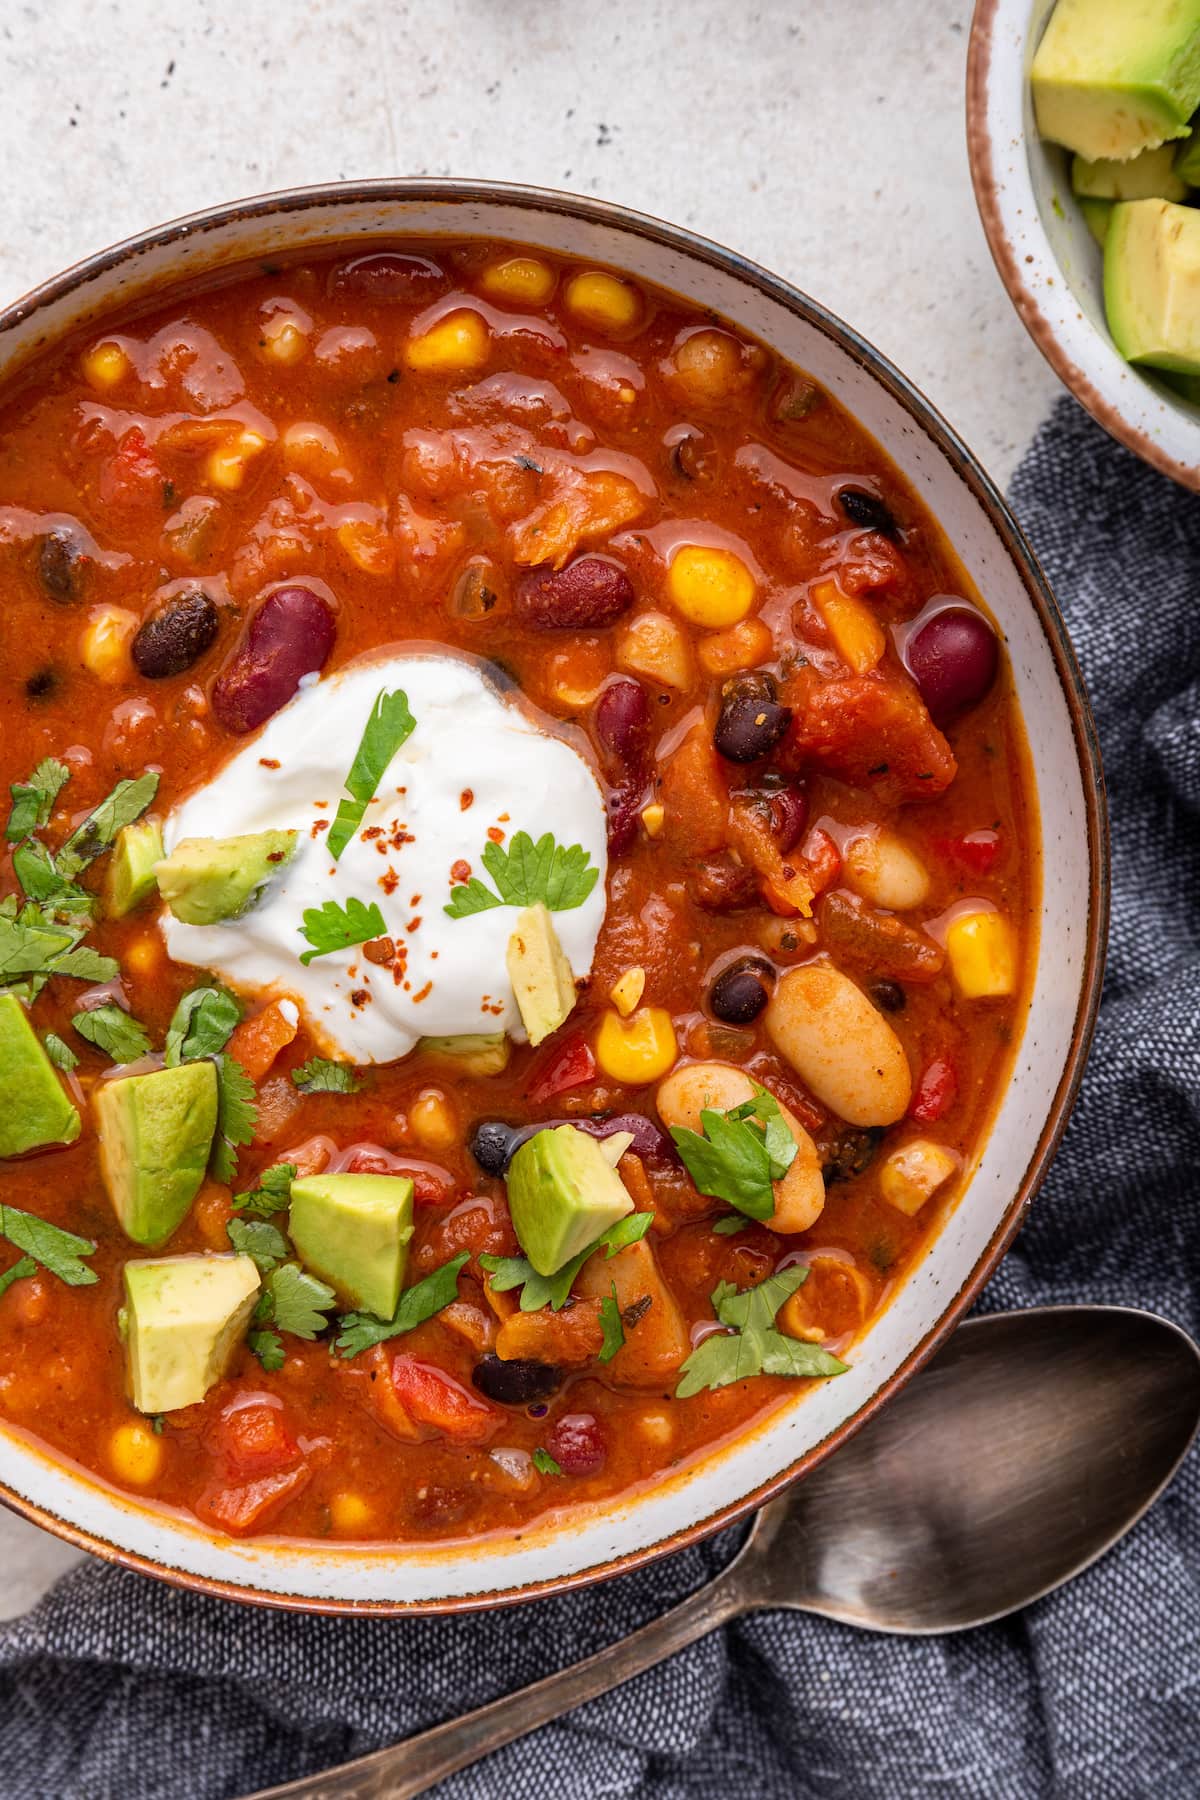 Vegetarian chili in a bowl. The chili is garnished with cilantro, sour cream, and avocado.